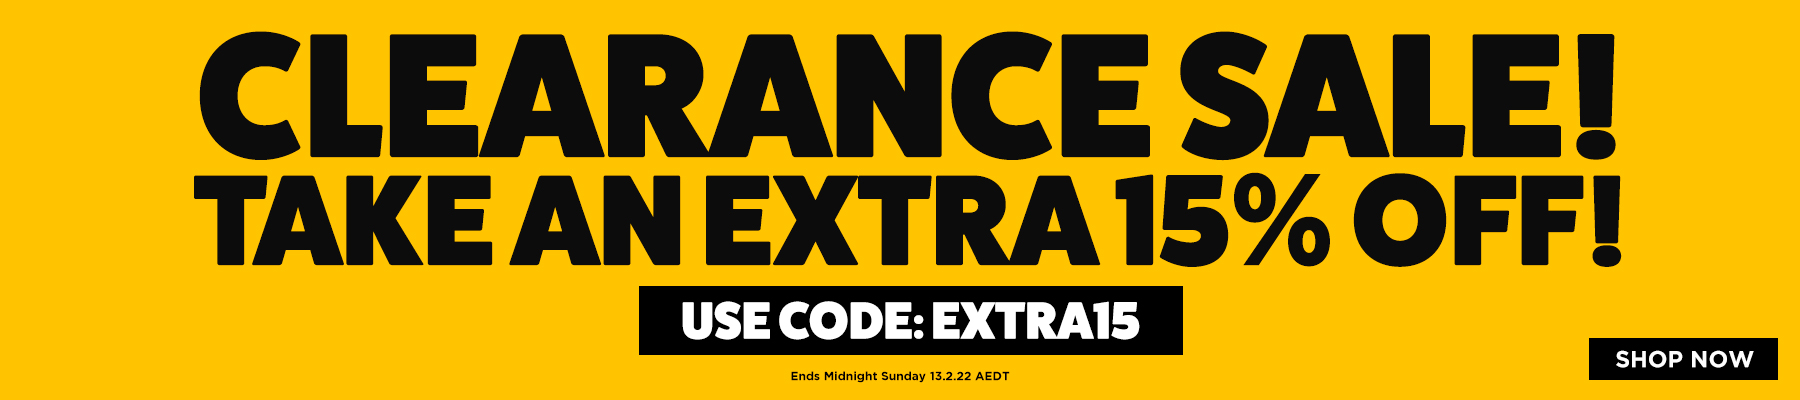 Pet House extra 15% OFF on clearance items with promo code. Save on pet foods, clothing, toys & more